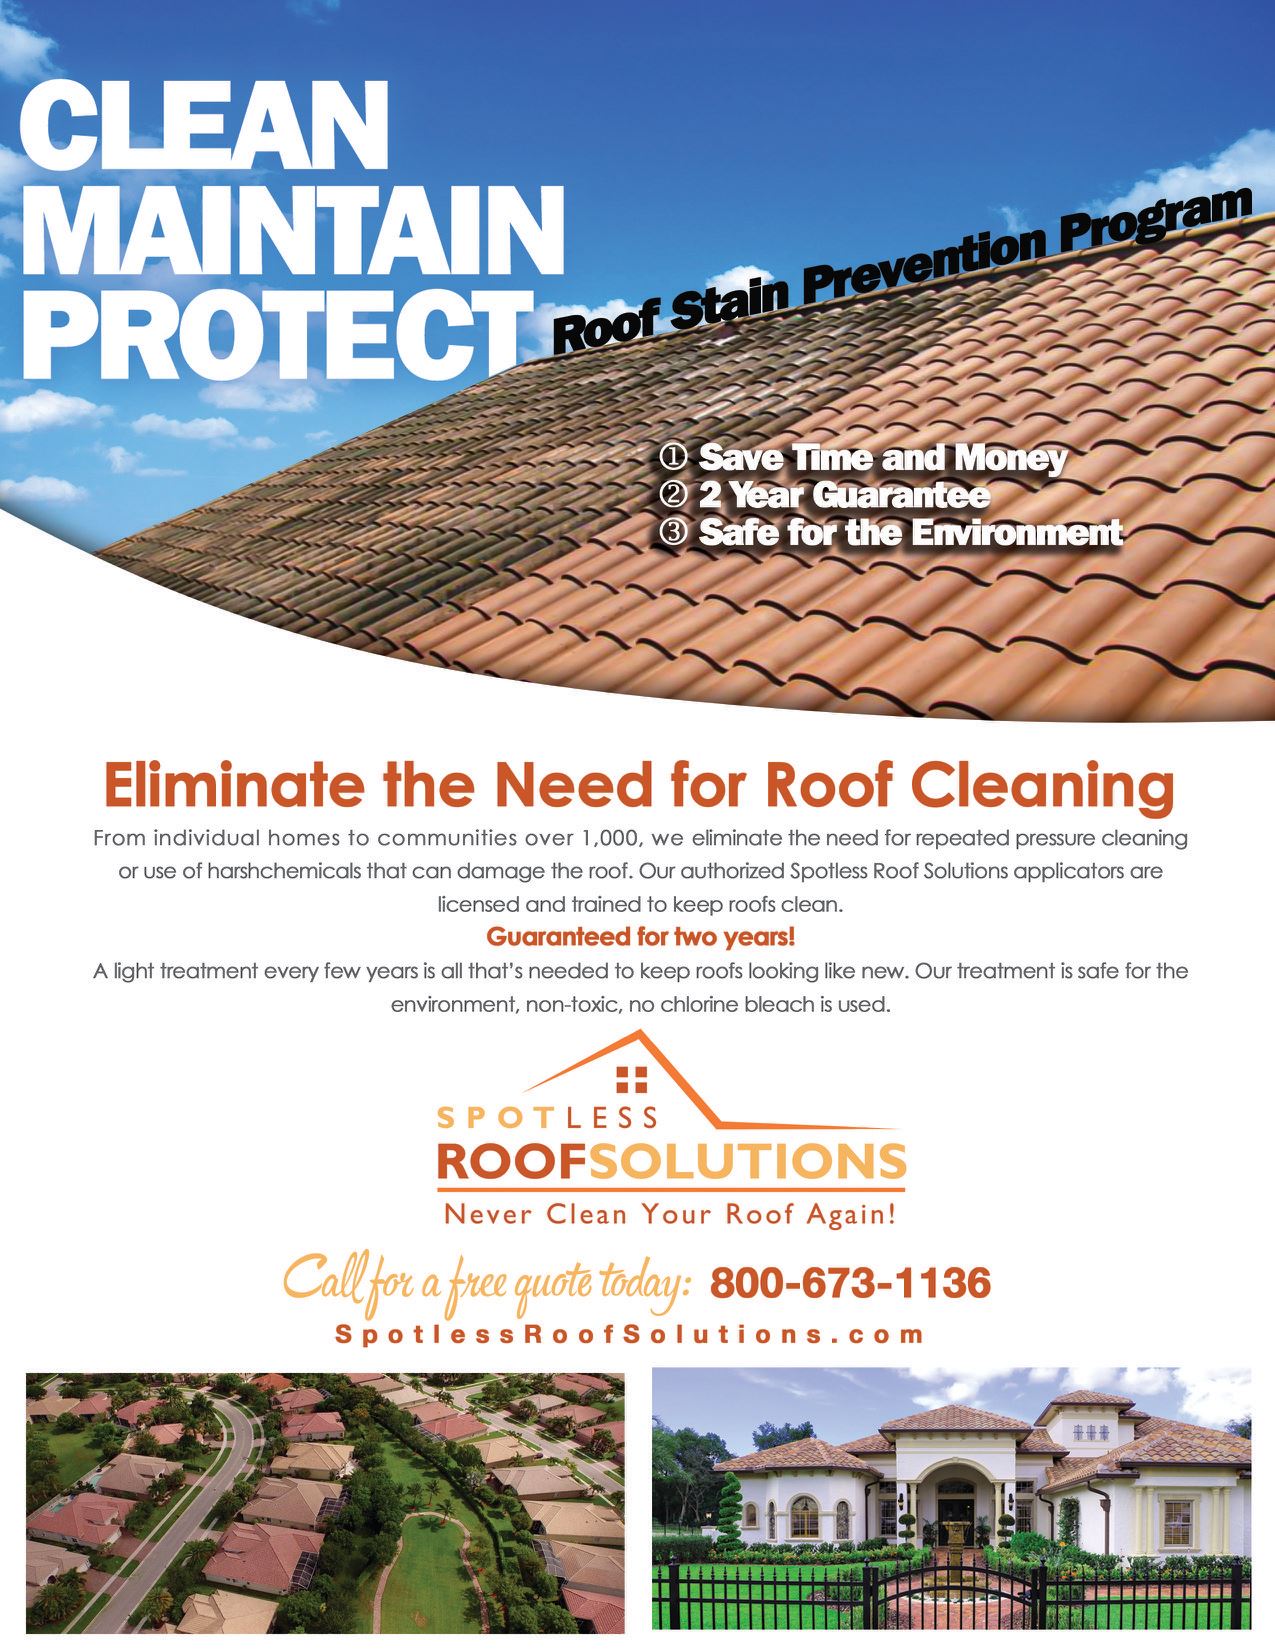 Are you looking for a way to keep your roof clean and looking new? by Anne Dondero